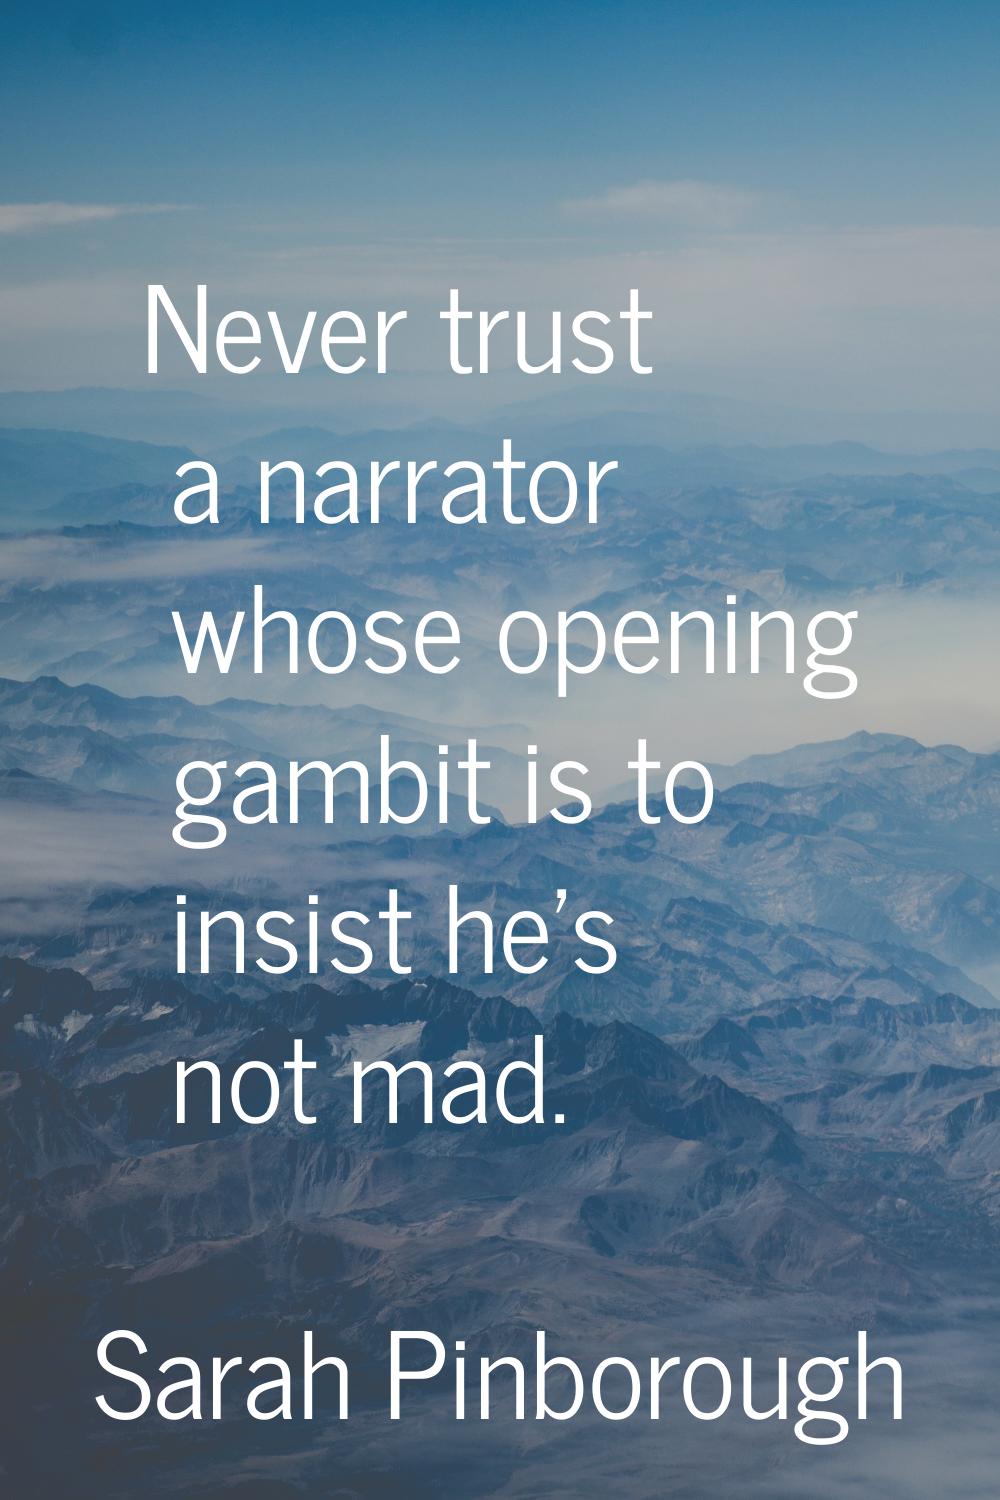 Never trust a narrator whose opening gambit is to insist he's not mad.